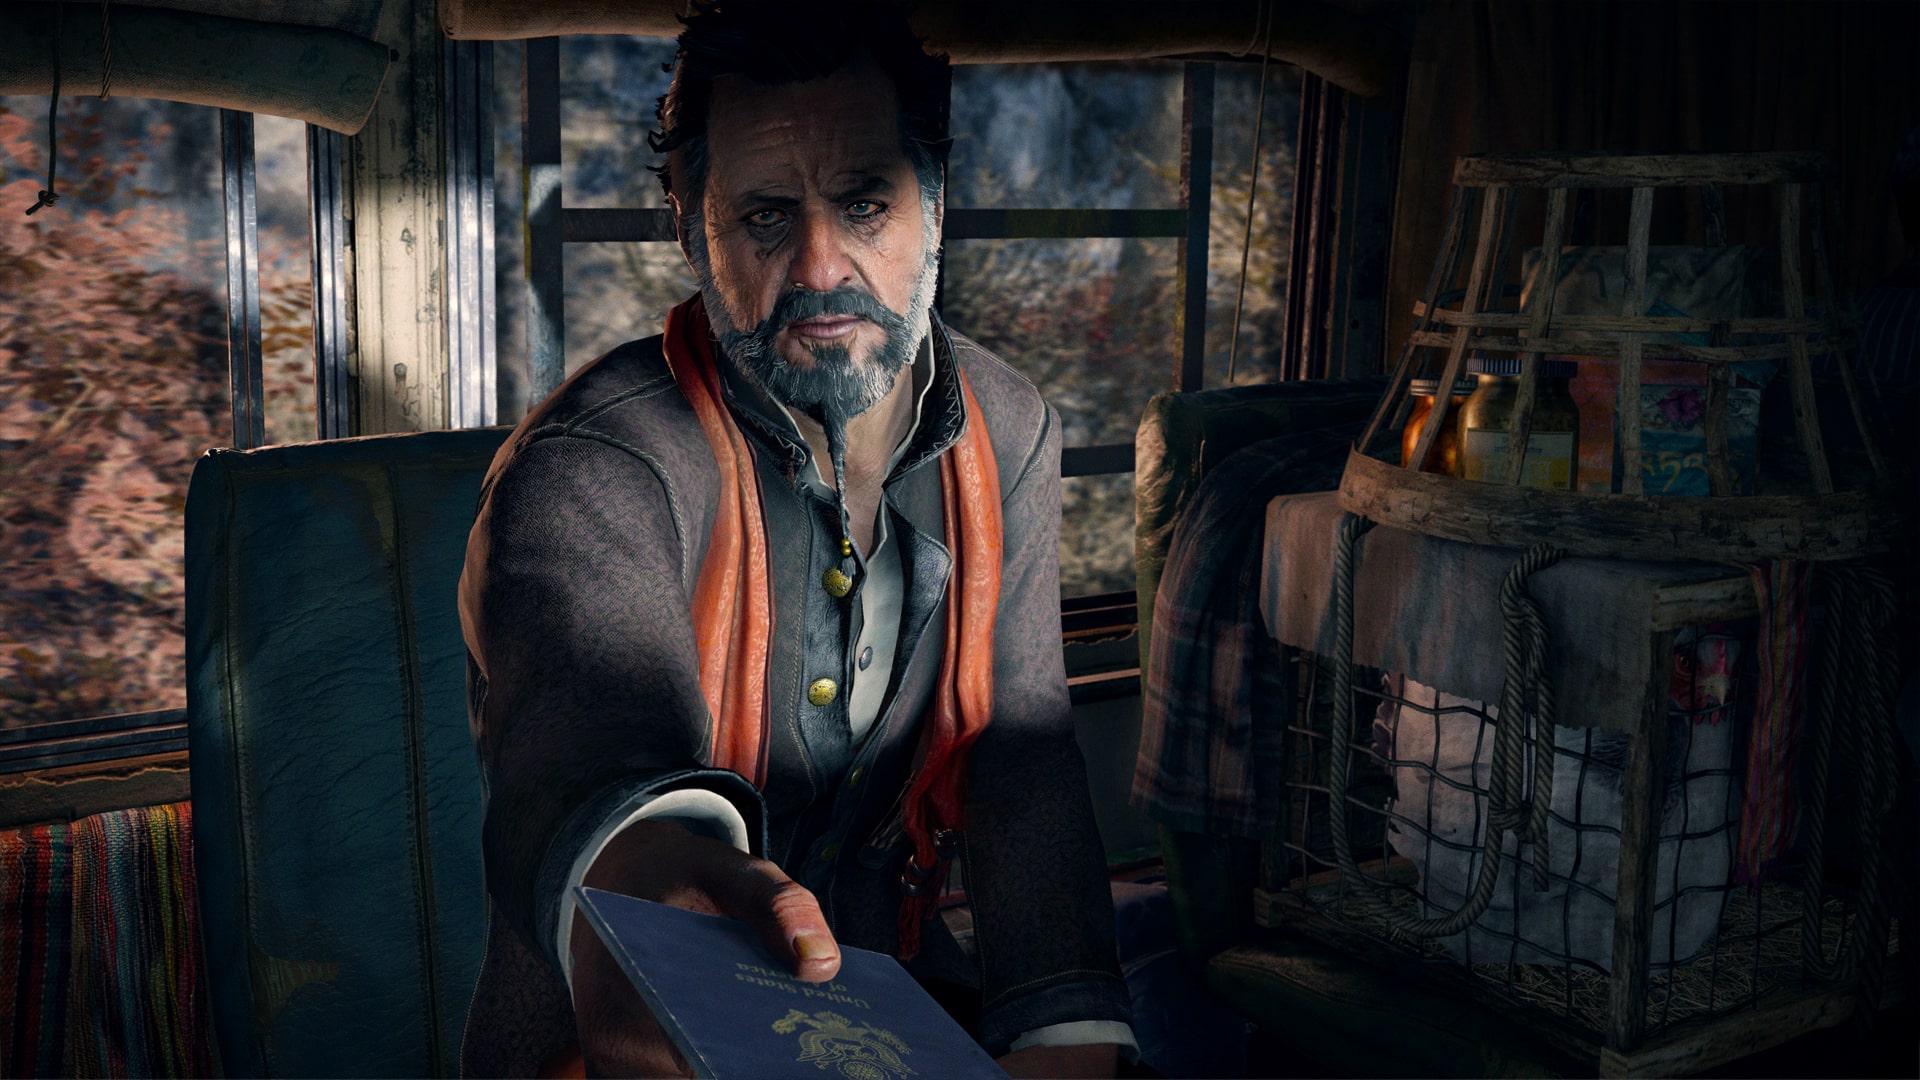 Play Far Cry 4 with friends on PS4 without owning a copy